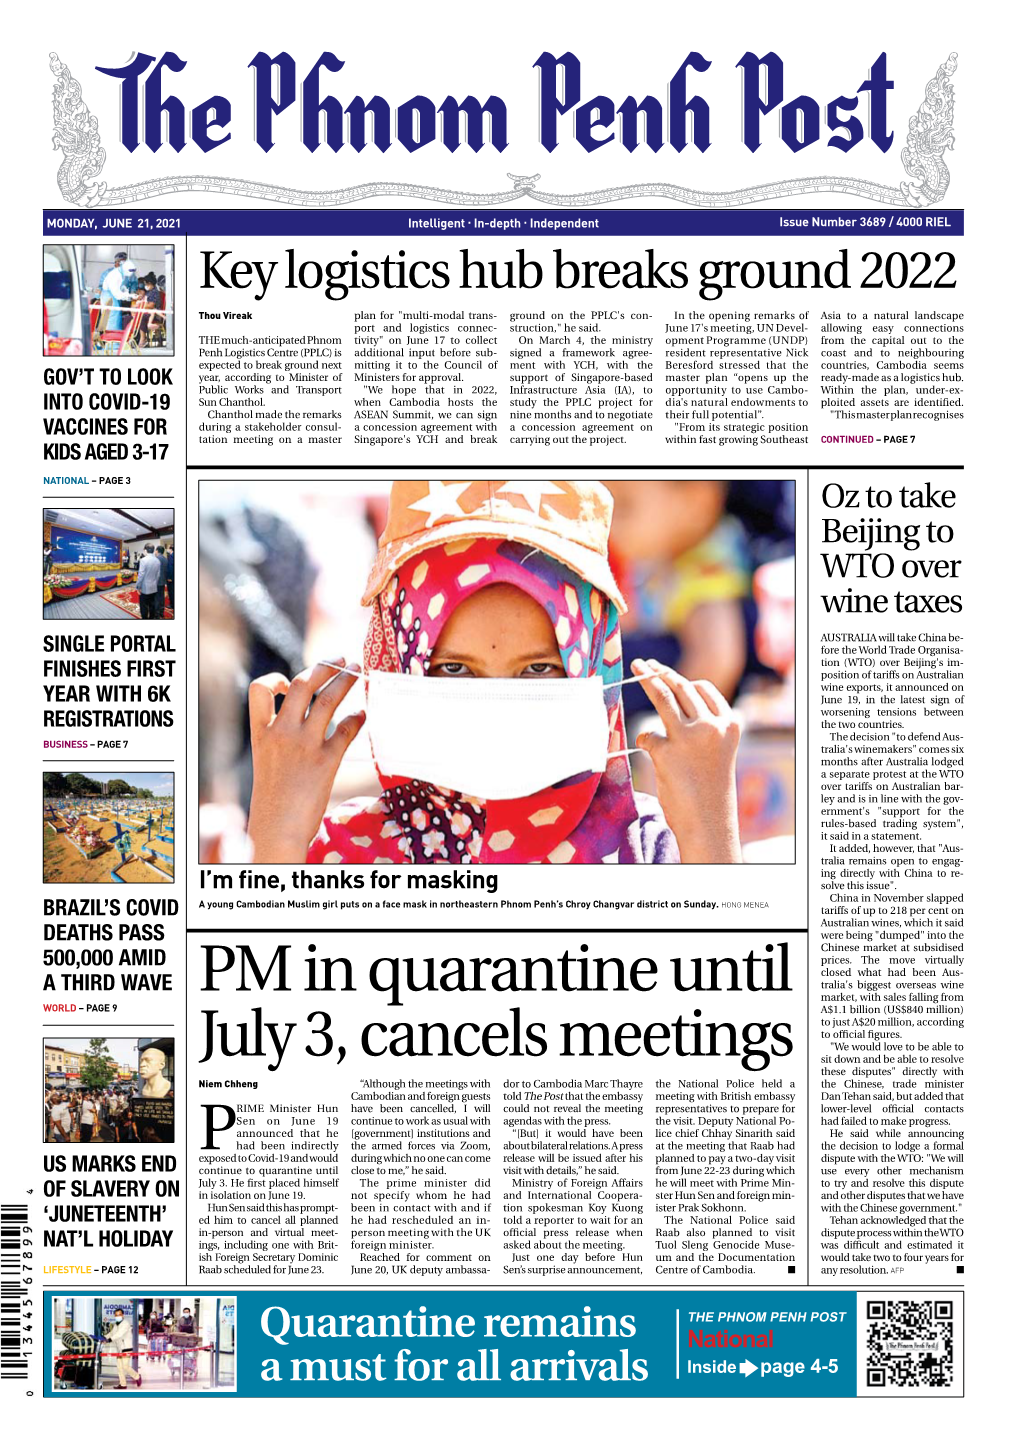 PM in Quarantine Until July 3, Cancels Meetings